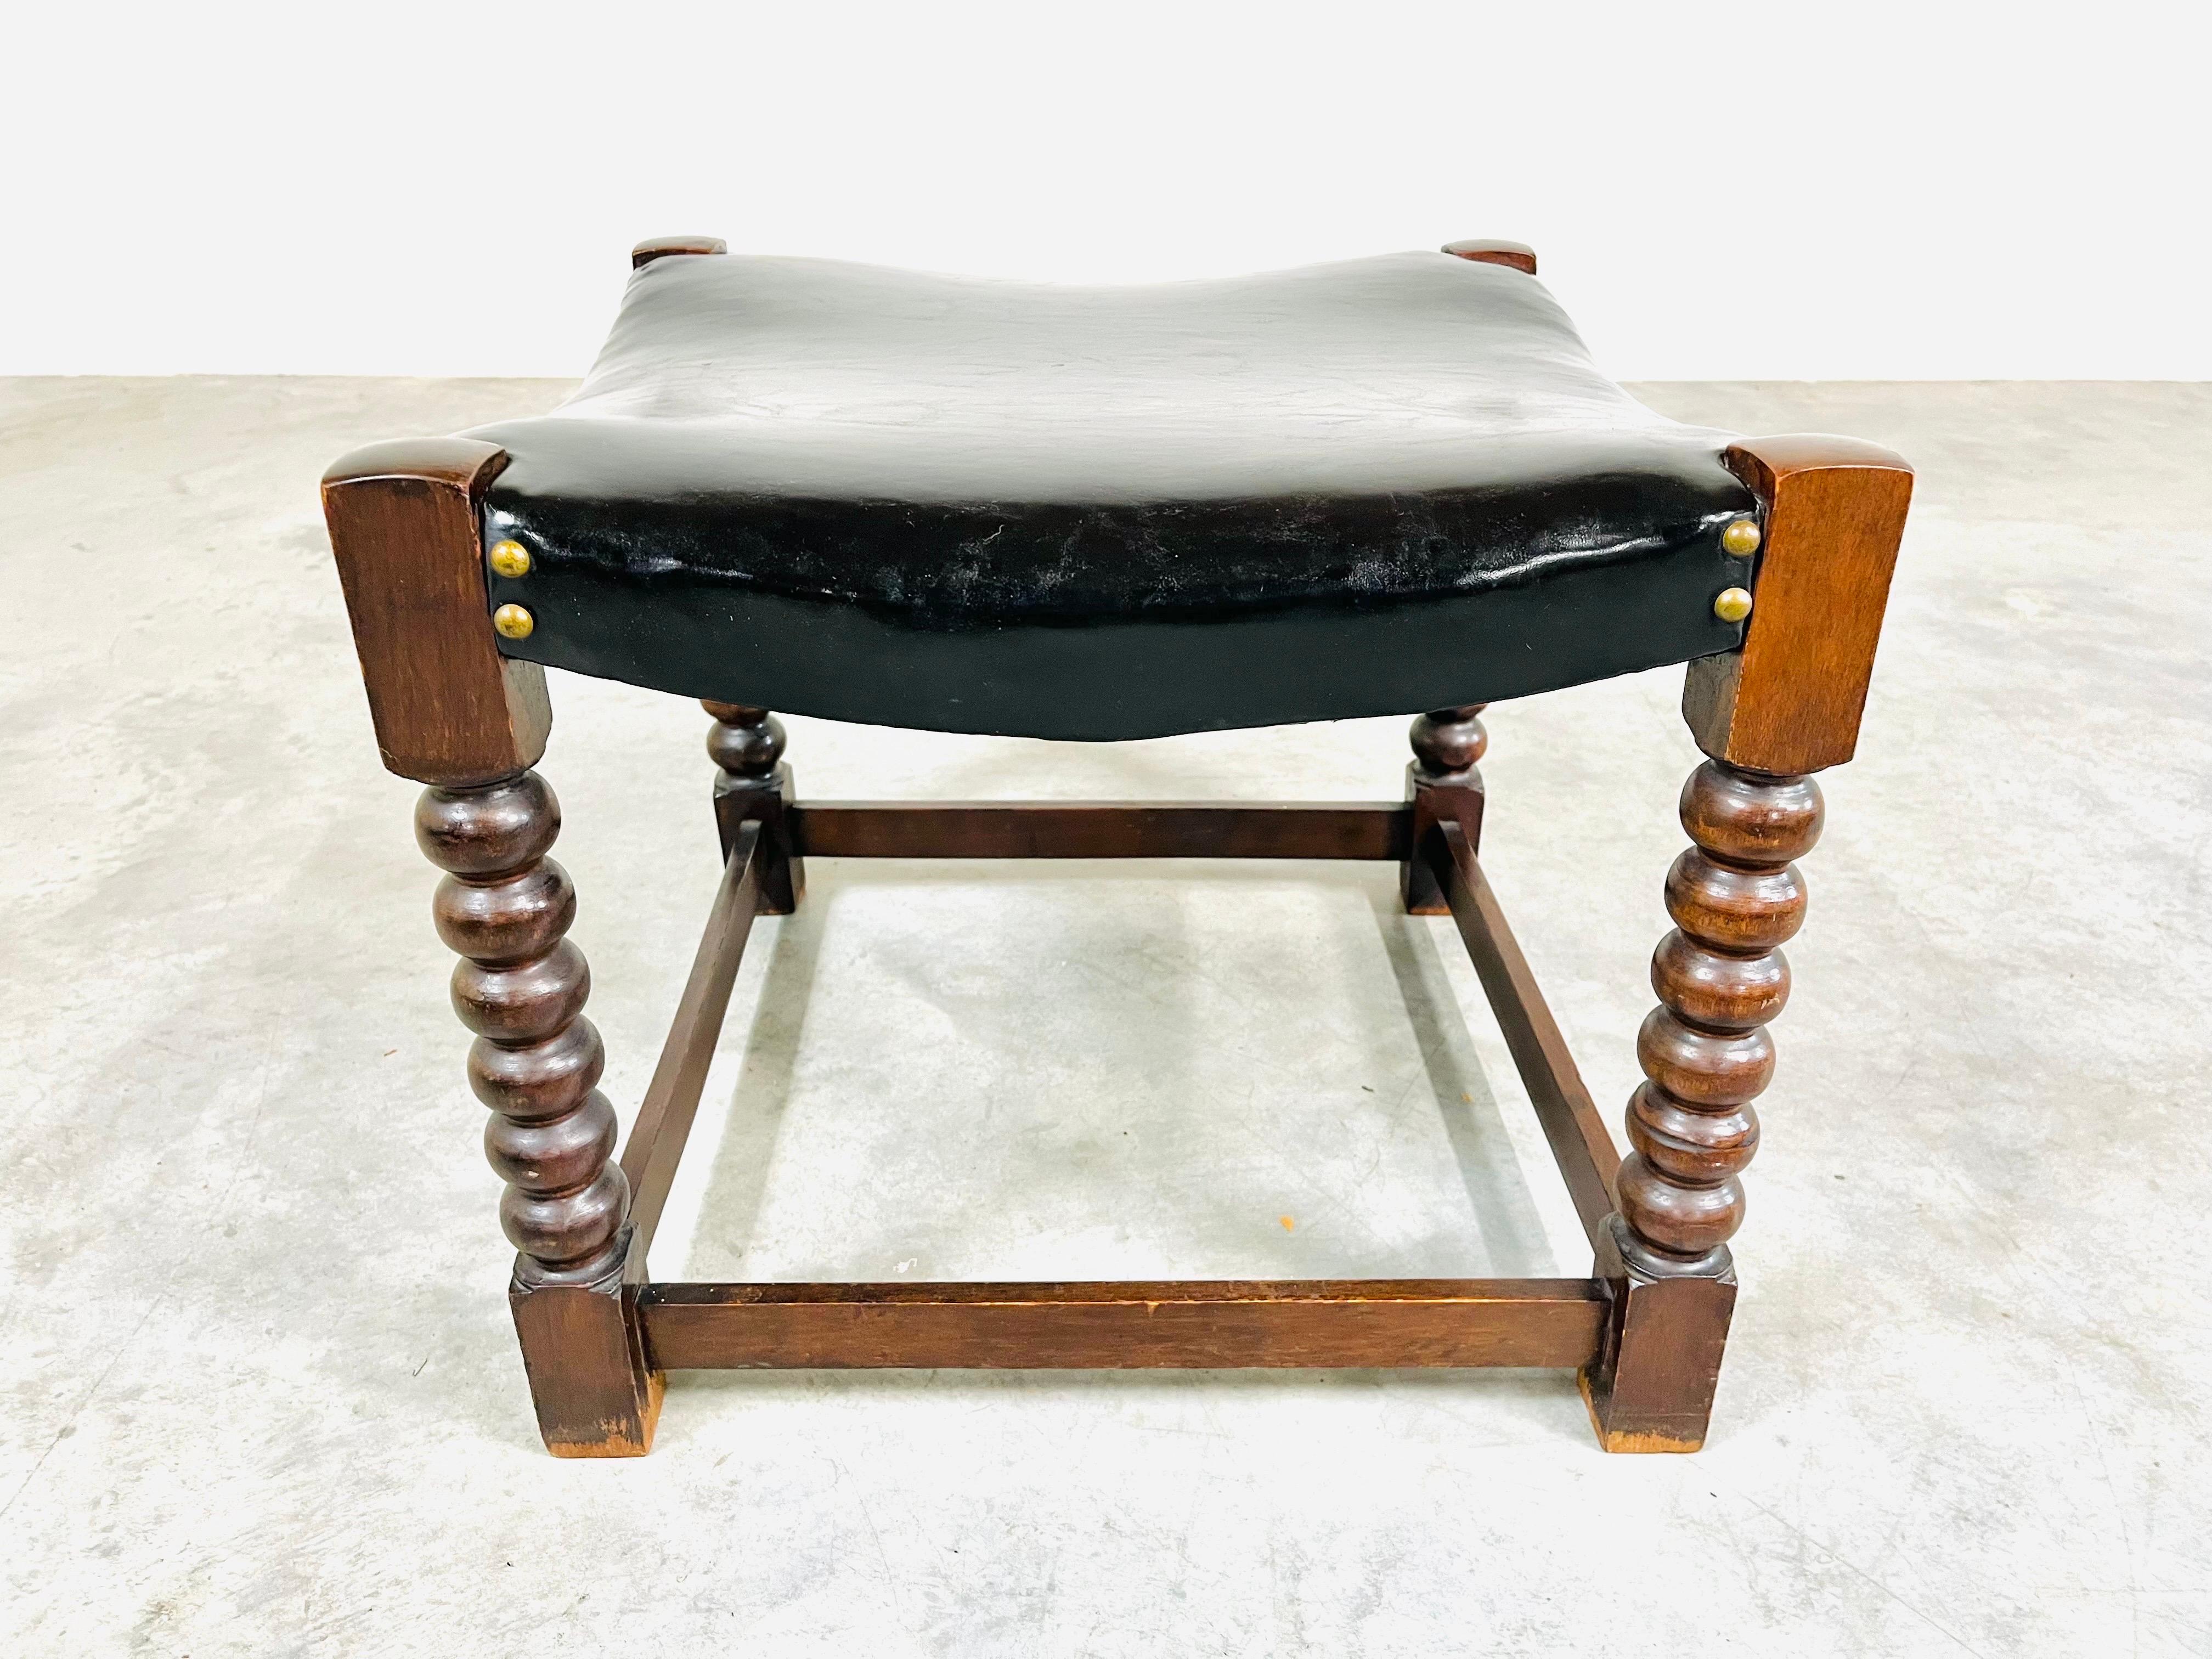 A beautifully hand carved 19th century Jacobean stool having oak frame with soft black leather top adorned with brass buttons. 
In very nice vintage condition having solid frame with well maintained leather. 
Measures: 16 x 18.75 x 18.75” HWD SH